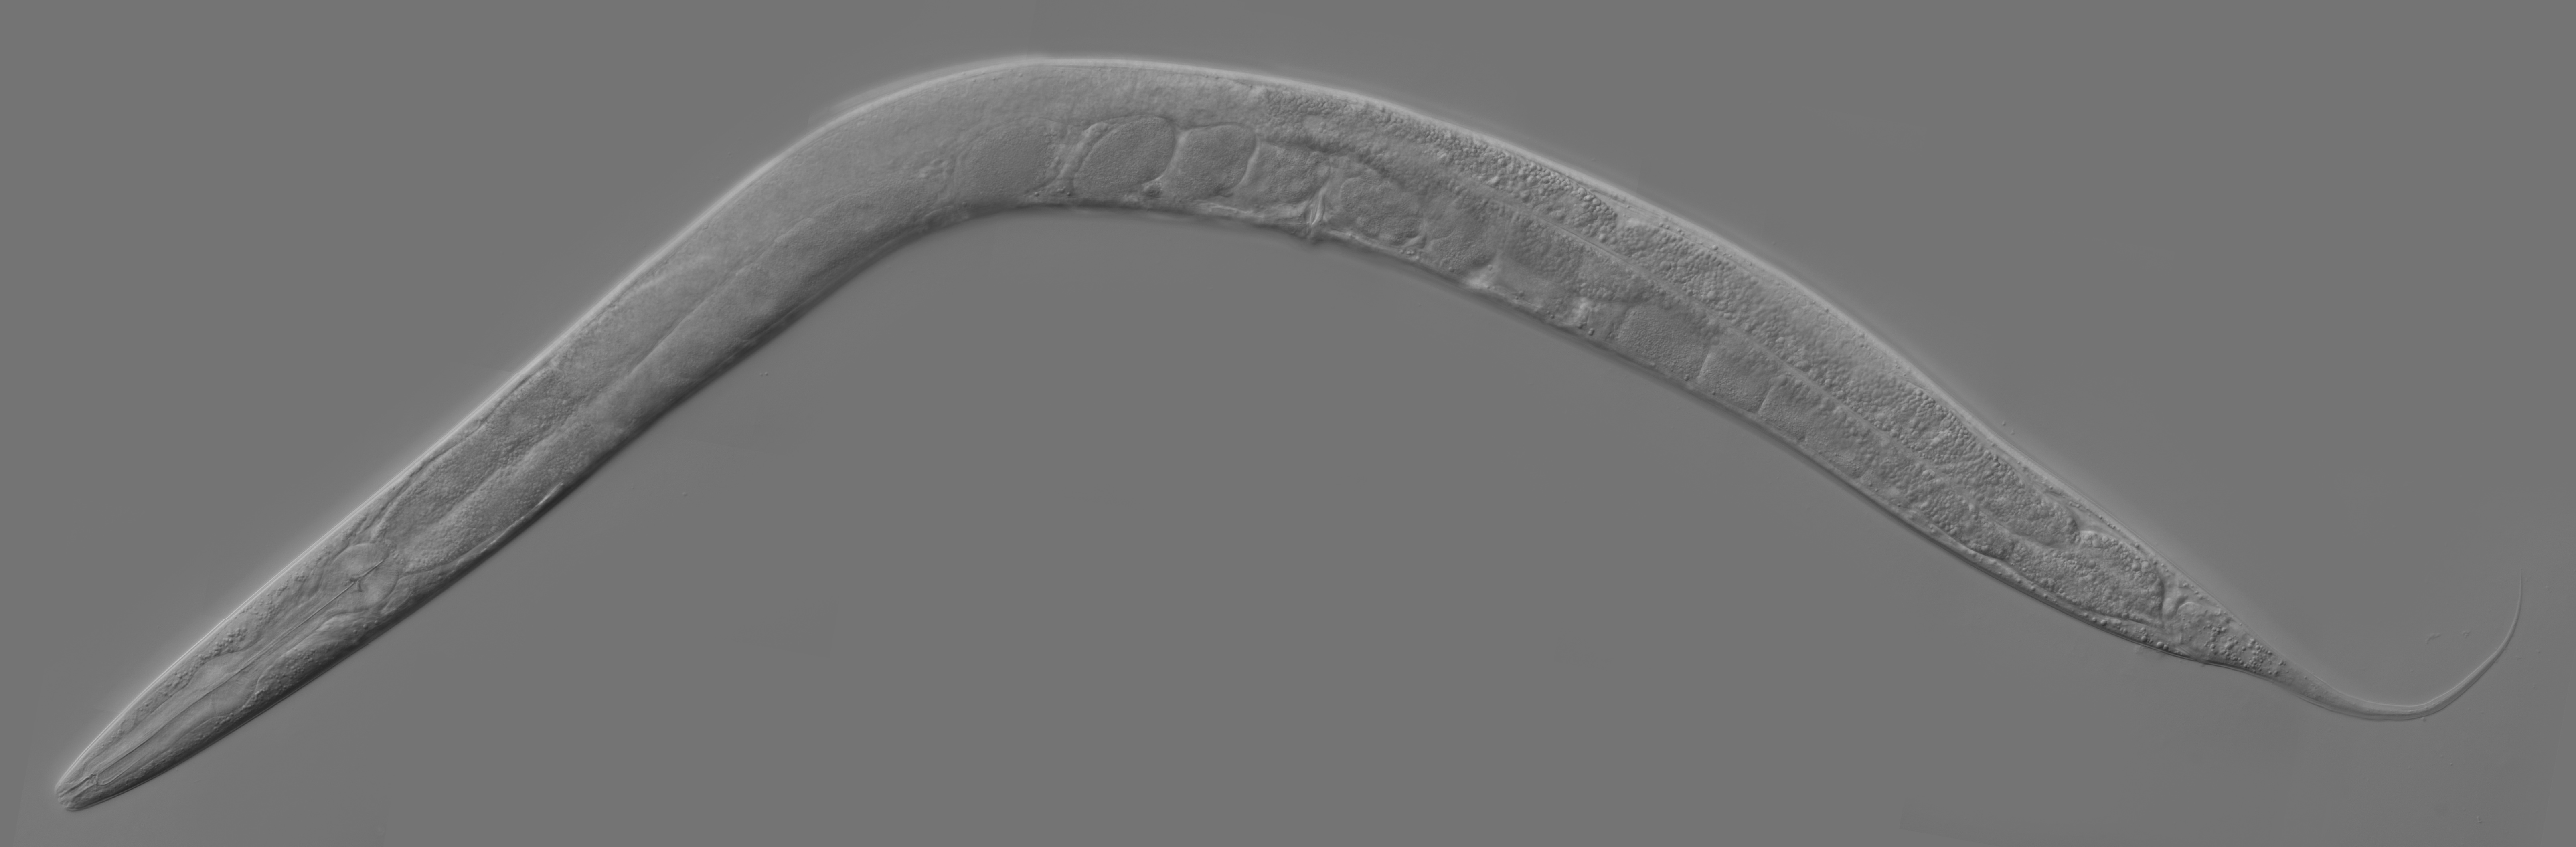 Caenorhabditis elegans, a free-living transparent nematode about 1 mm in length that lives in temperate soil environments. In 1963, Sydney Brenner proposed research into C. elegans, primarily in the area of neuronal development. In 1974, he began research into the molecular and developmental biology of C. elegans, which has since been extensively used as a model organism. It was the first multicellular organism to have its whole genome sequenced, and as of 2019, is the only organism to have its connectome (neuronal “wiring diagram”) completed.